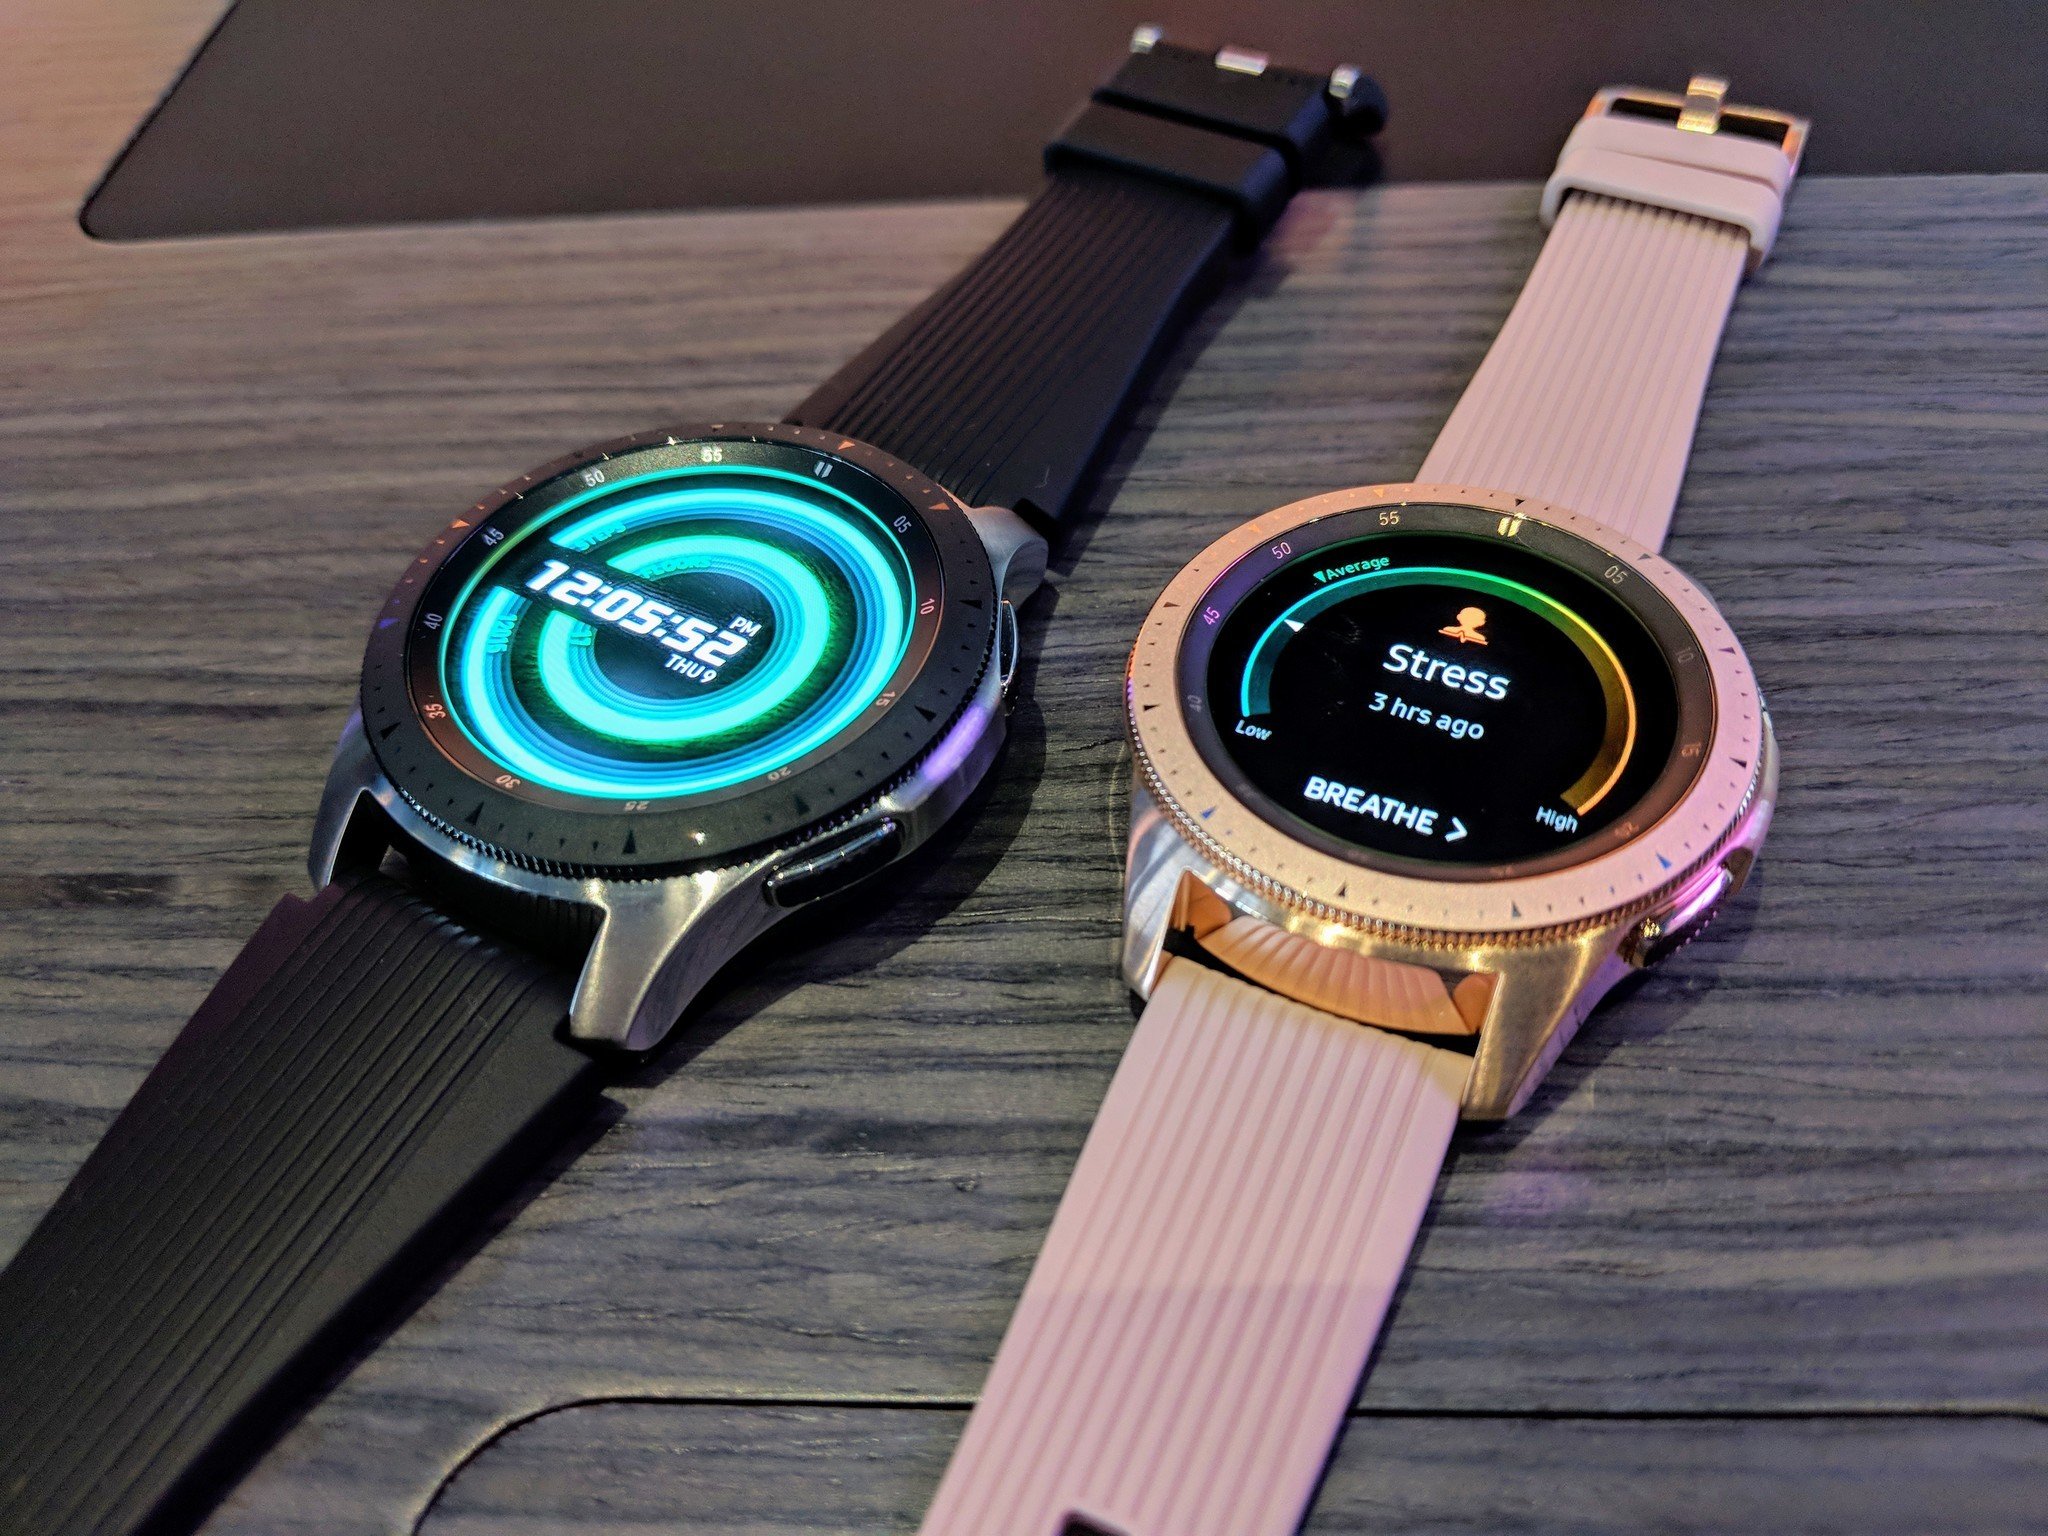 t mobile samsung watches